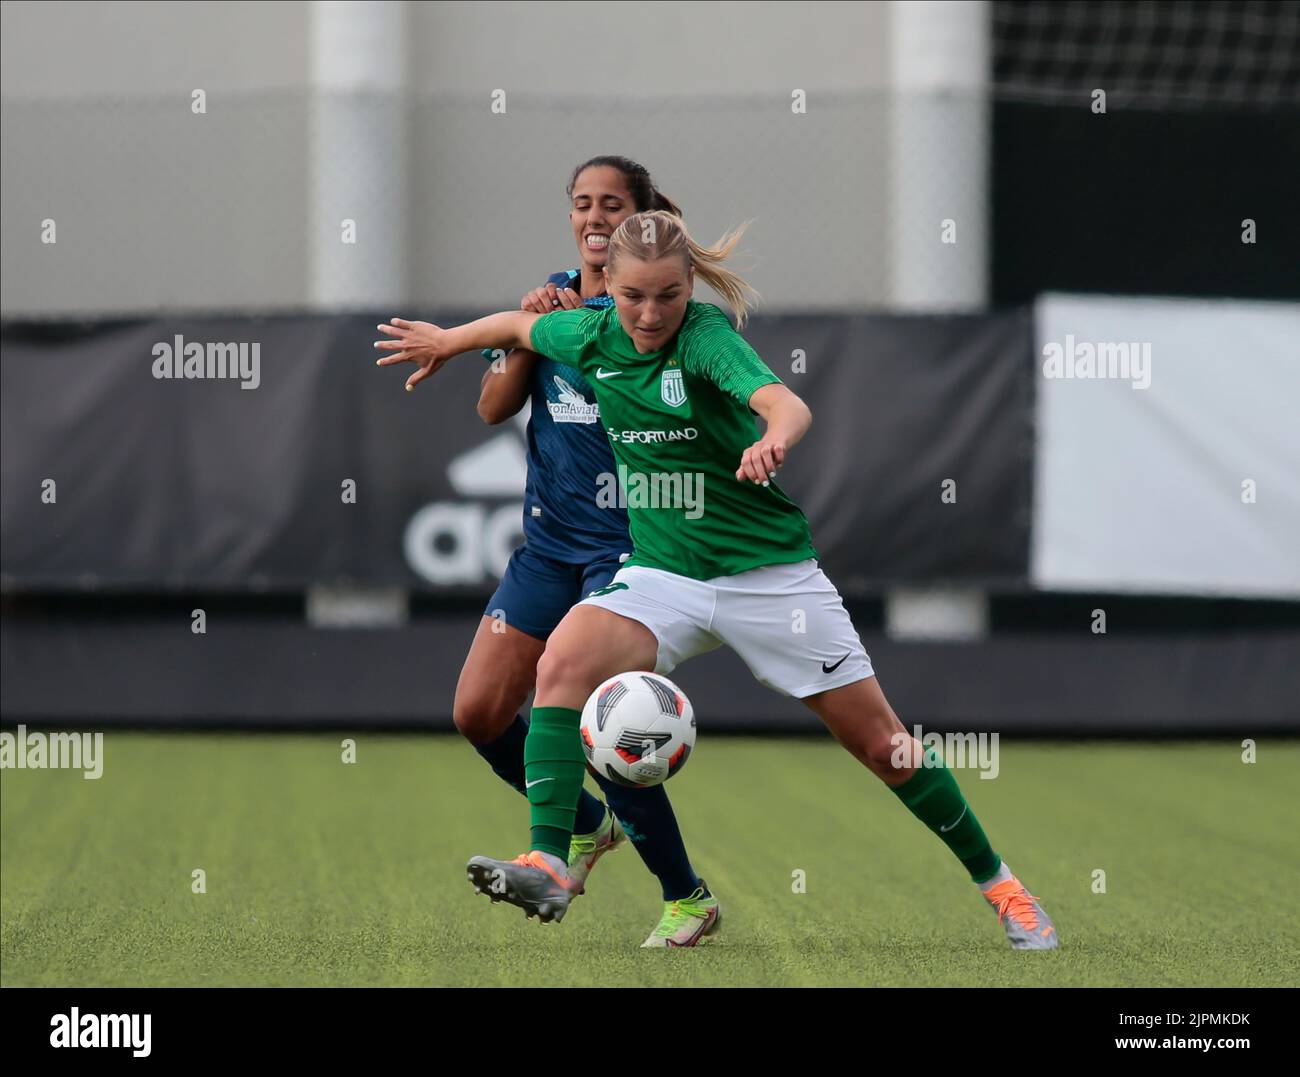 Vinovo, Italy. 18th Aug, 2022. Kethy Ounpuu of Tallinna Fc Flora during the match Tallin Fc Flora and Fc qiryat of the first qualifying round of the Uefa Womenâ&#x80;&#x99;s Champions League on August 18, 2022 at Juventus Training Ground, Turin, Italy. Photo Nderim Kaceli Credit: Independent Photo Agency/Alamy Live News Stock Photo